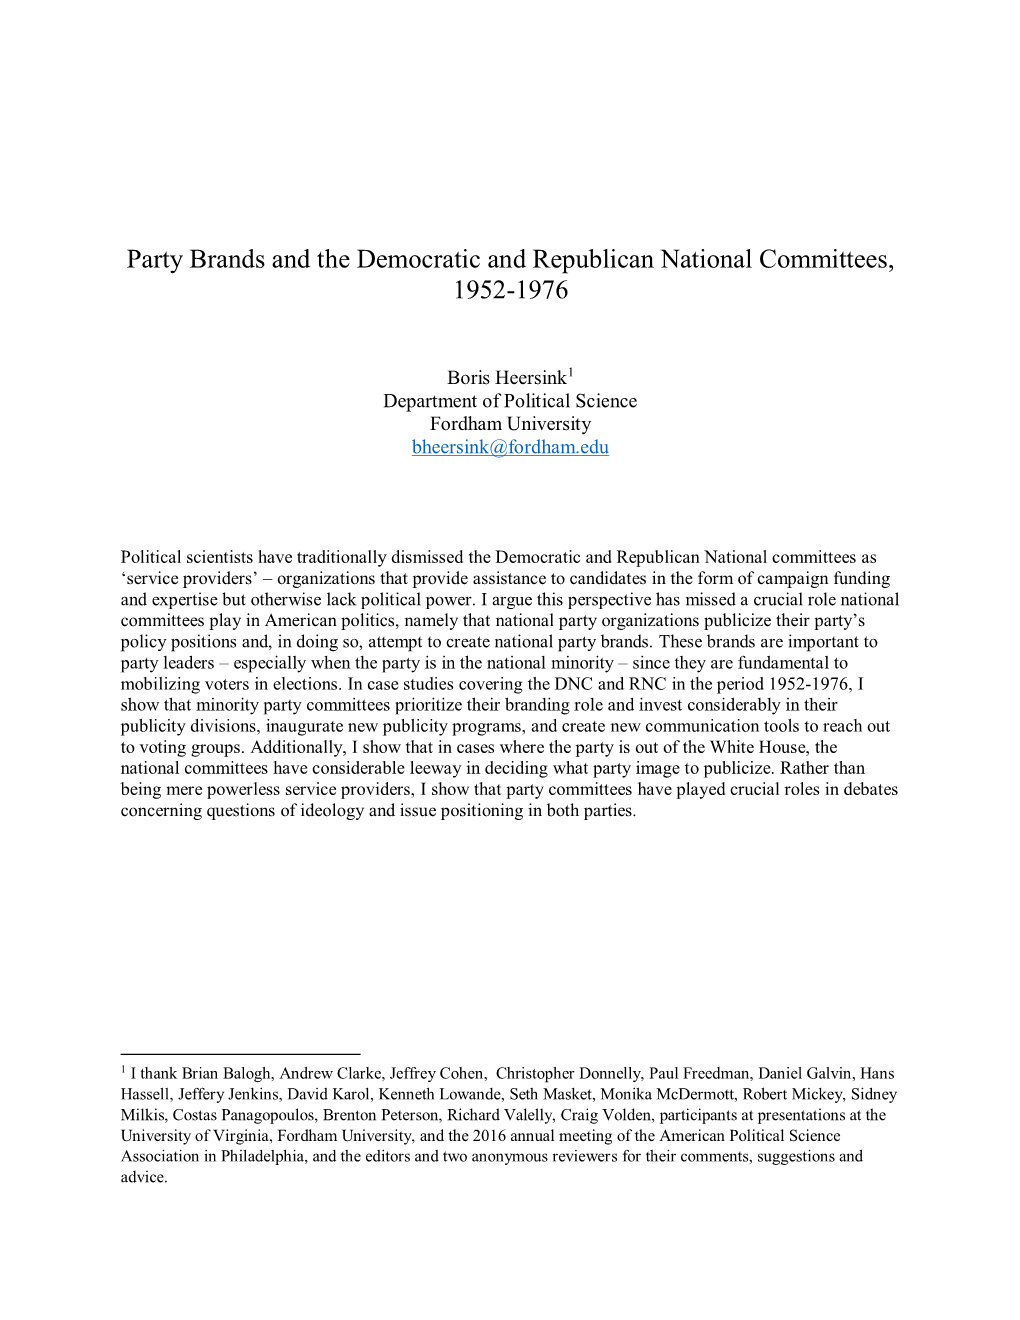 Party Brands and the Democratic and Republican National Committees, 1952-1976